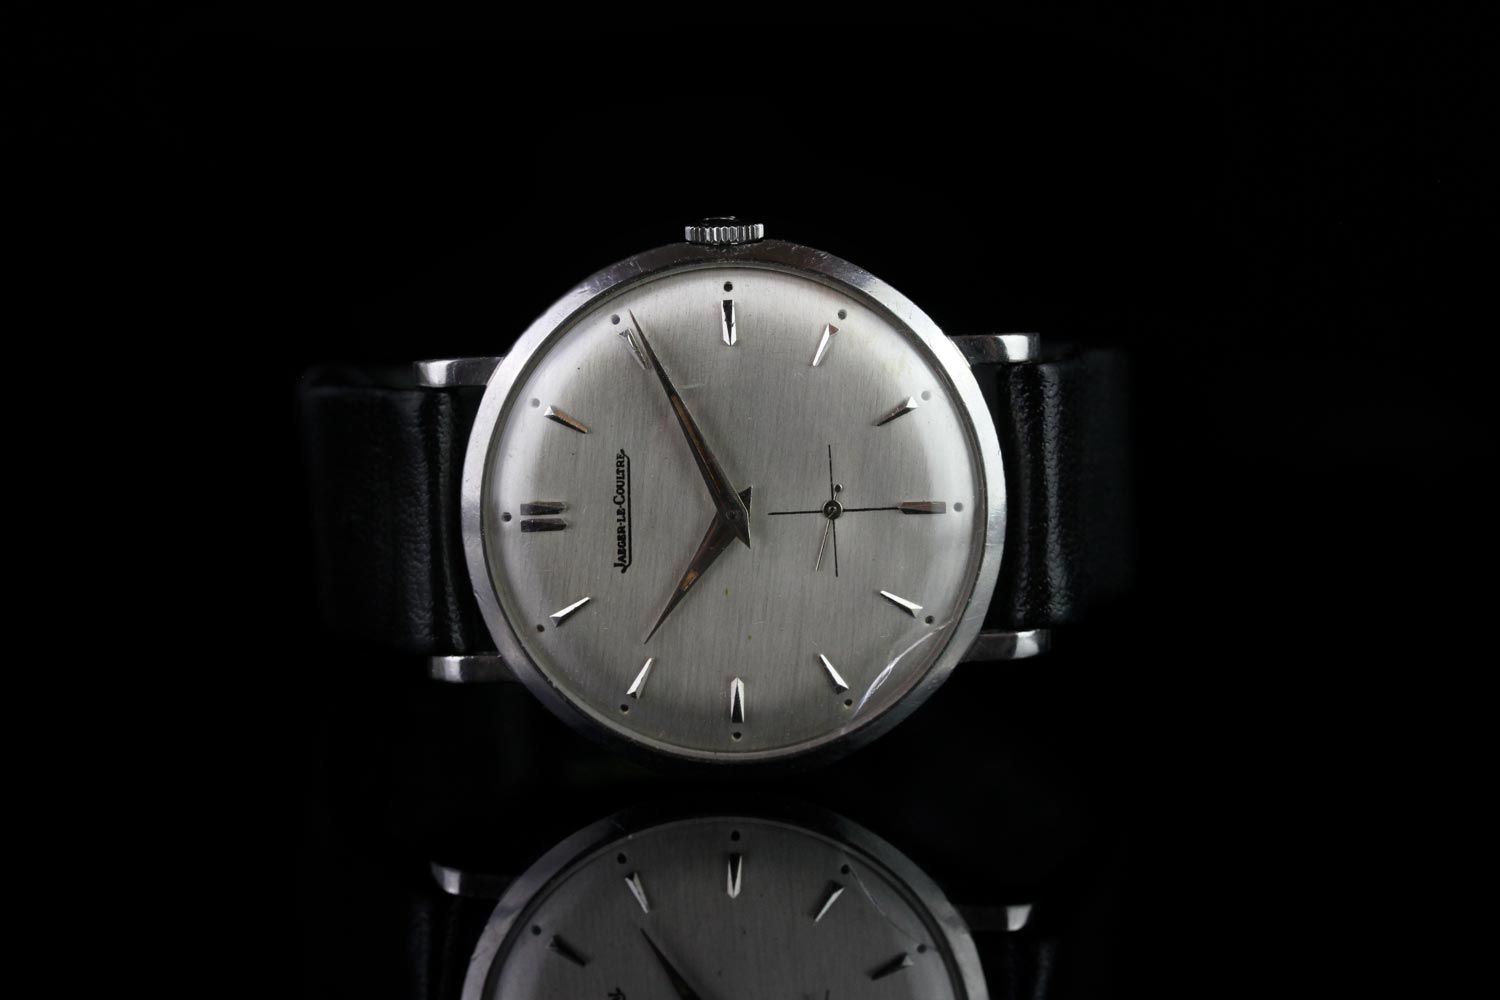 GENTS JAEGER-LE COULTRE VINTAGE WATCH,round, silver dial and hands, silver baton markers,30mm